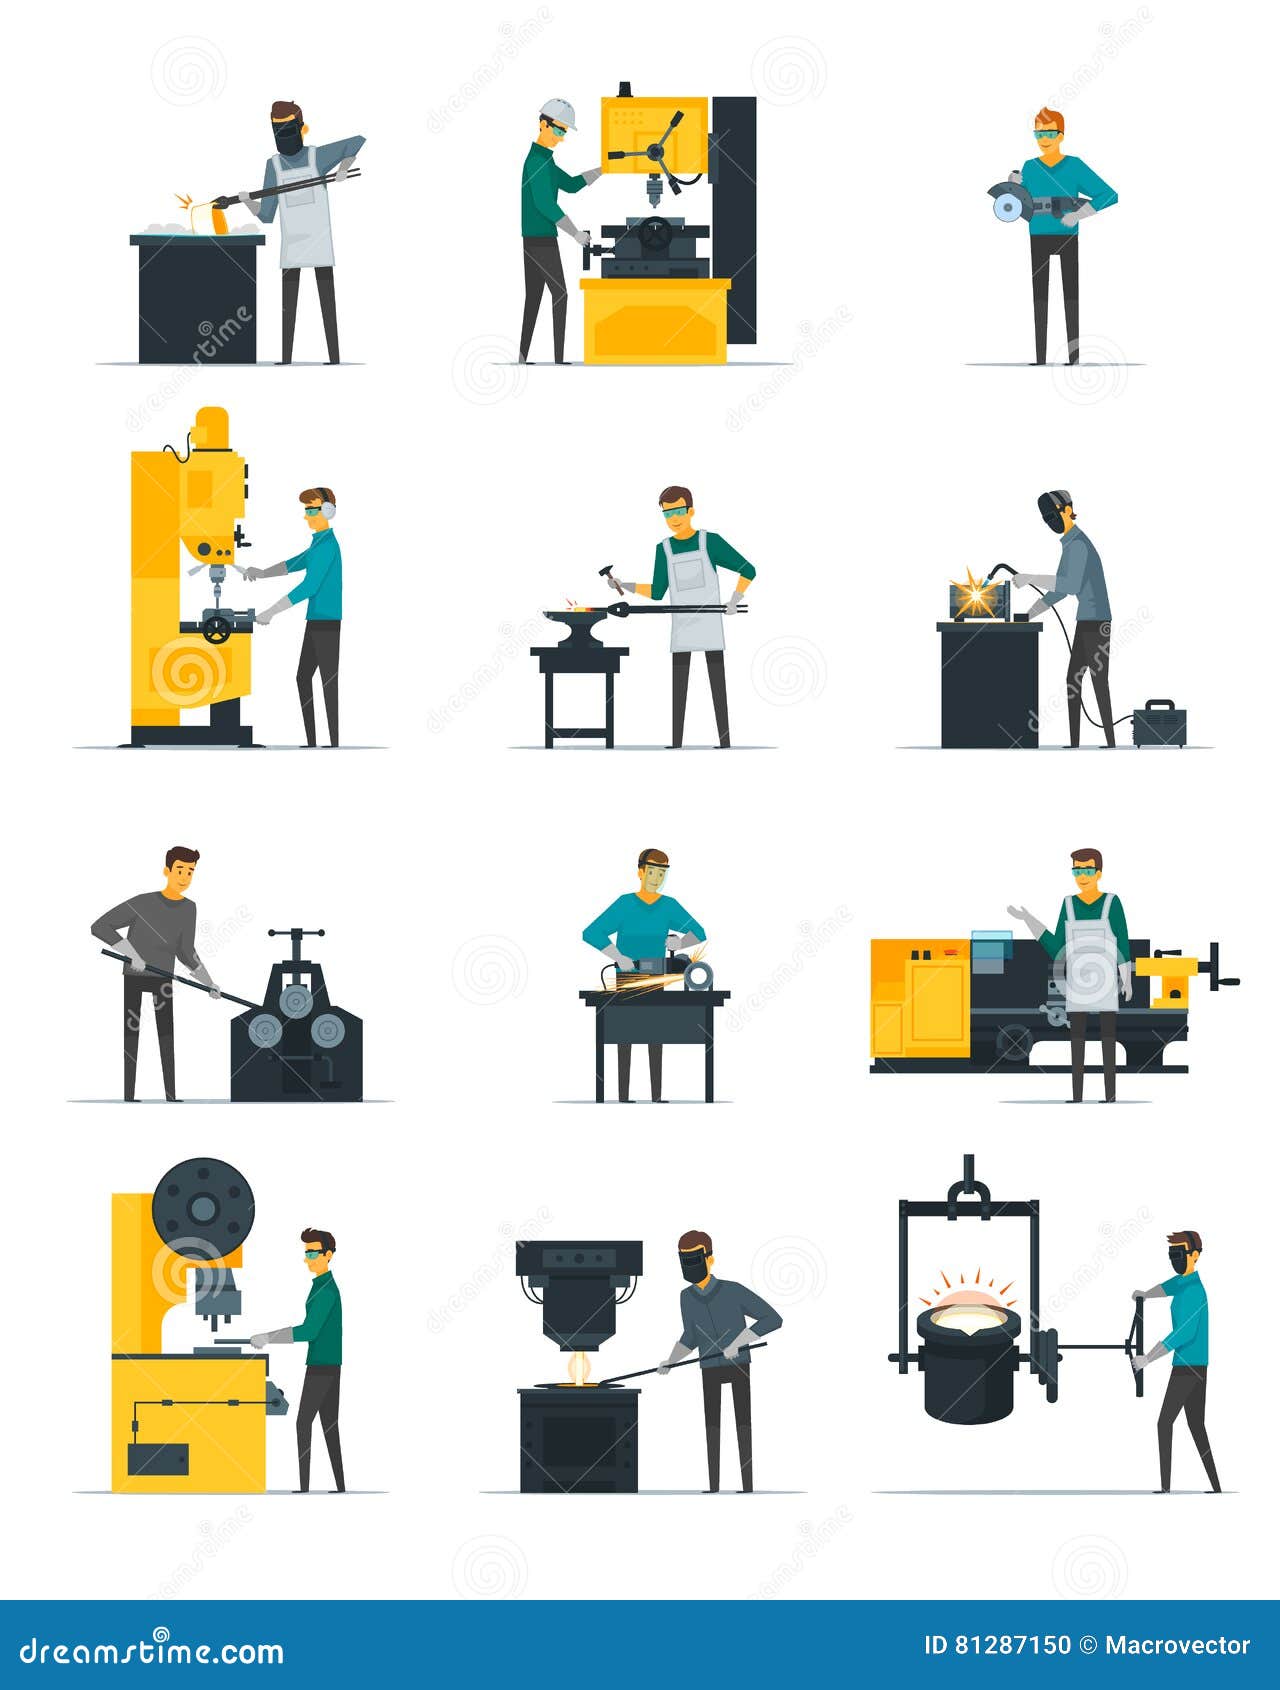 Blacksmith Metalworking Process Flat Icons Collection Stock Vector Illustration of craftsman